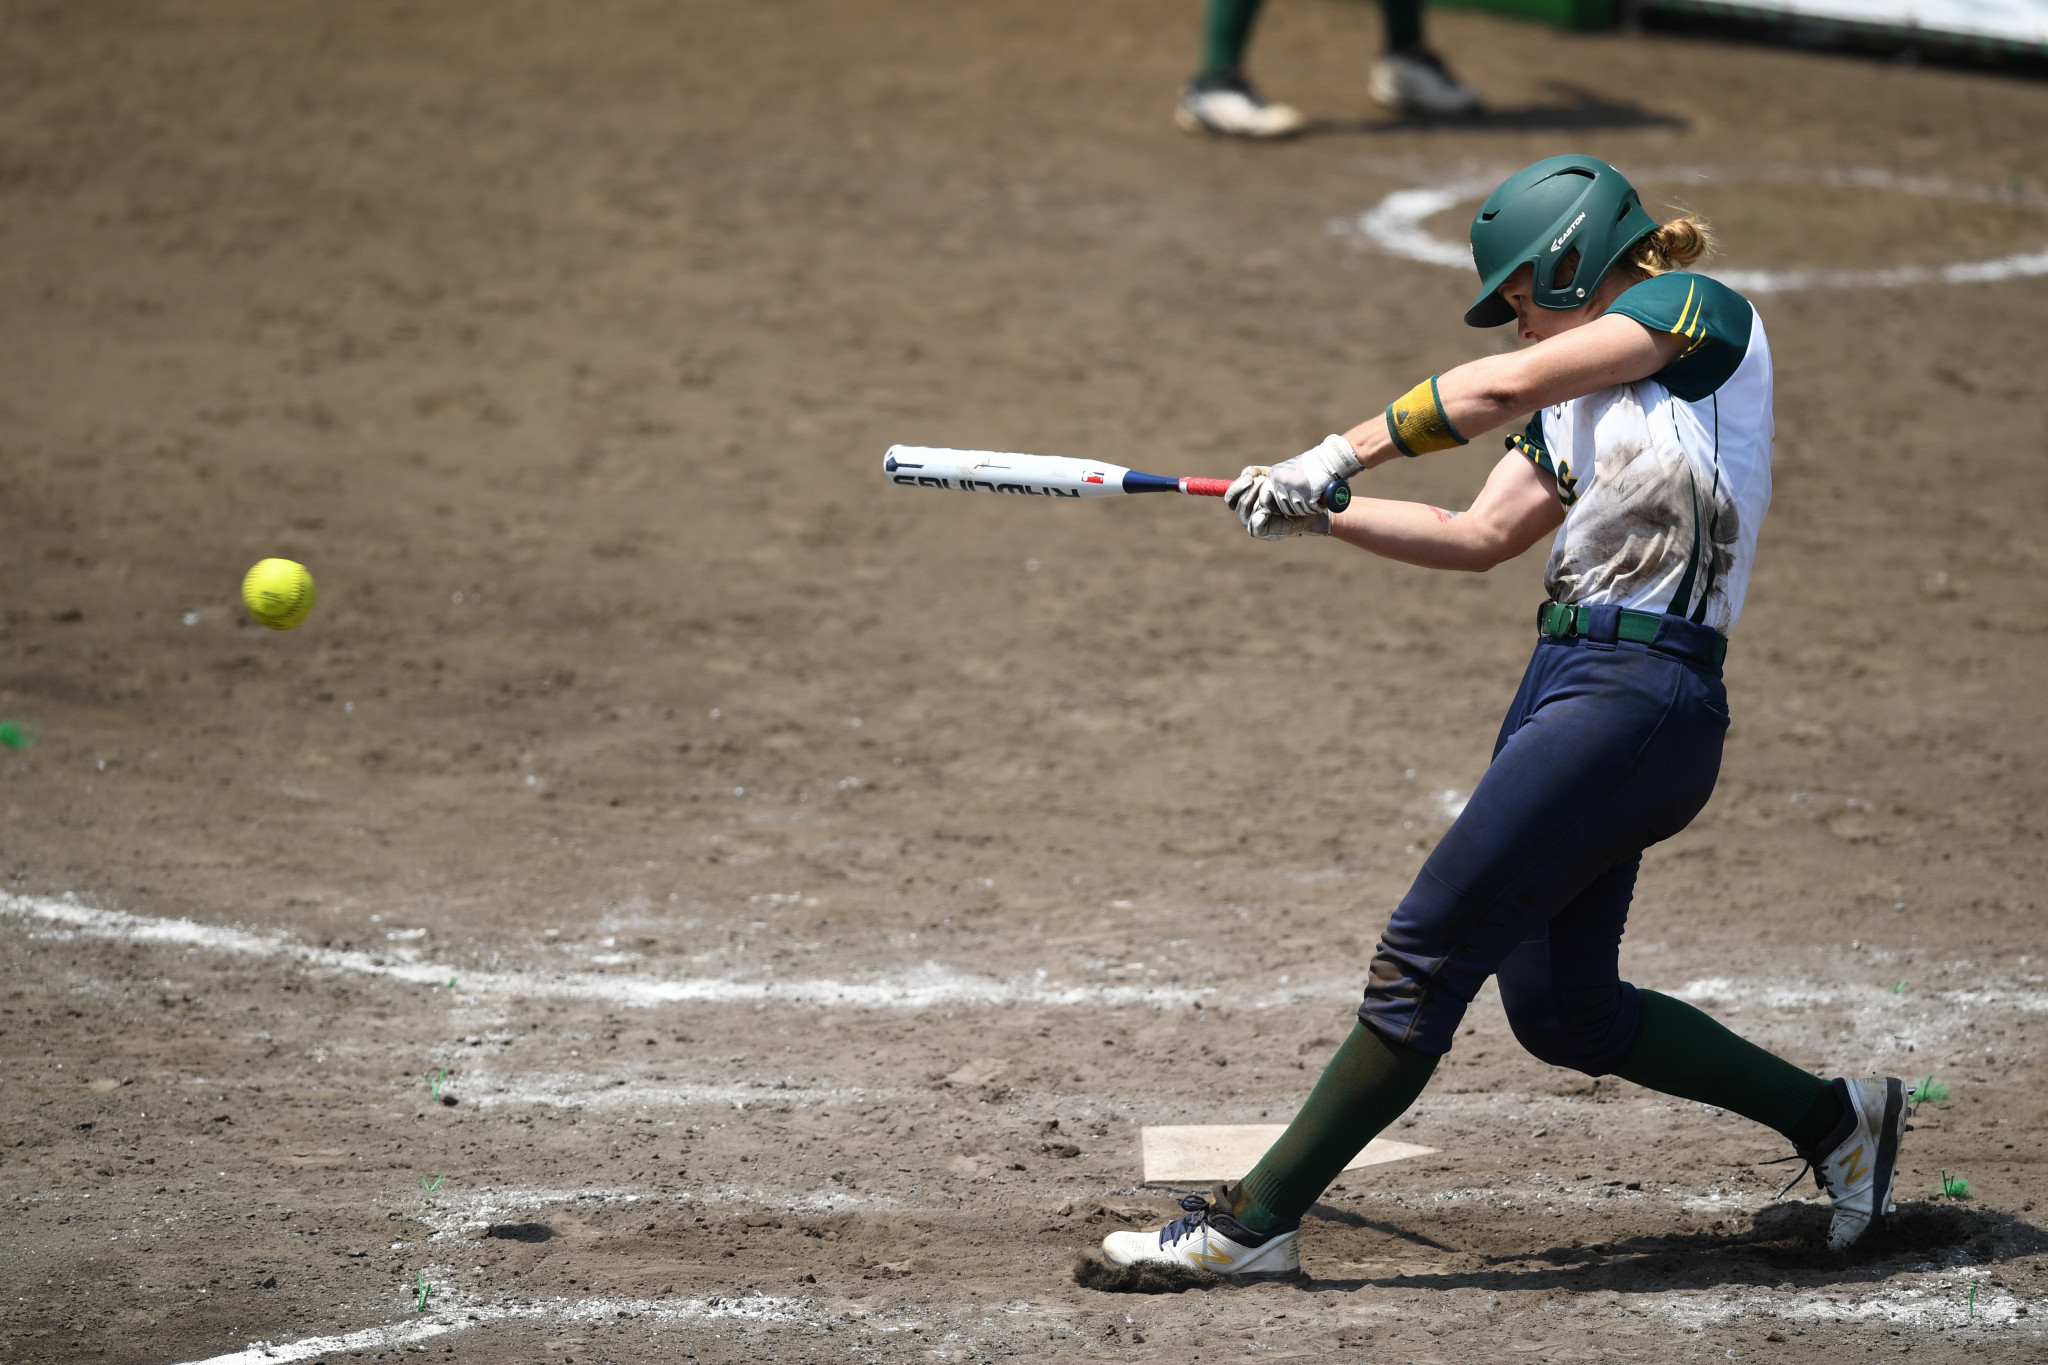 Australian softball star Stacey Porter claimed the postponement of the Tokyo 2020 Olympics made her "hungrier" to compete ©Getty Images